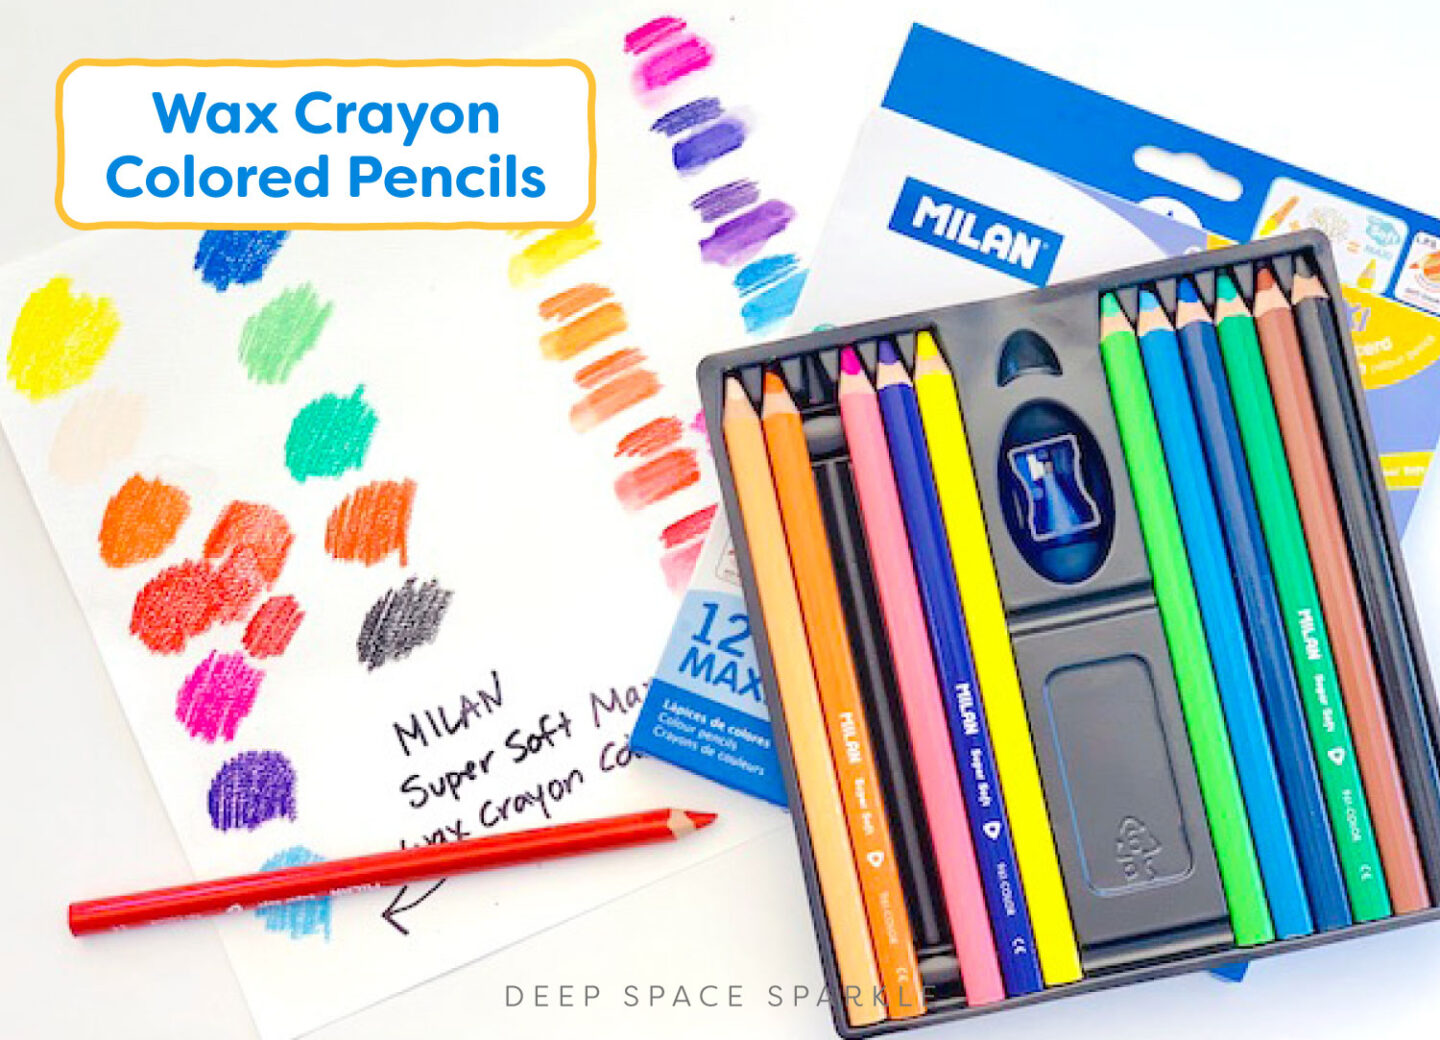 Wax Crayon pencils The Top 5 Watercolor, Colored Pencil and Crayon Sets for Kids